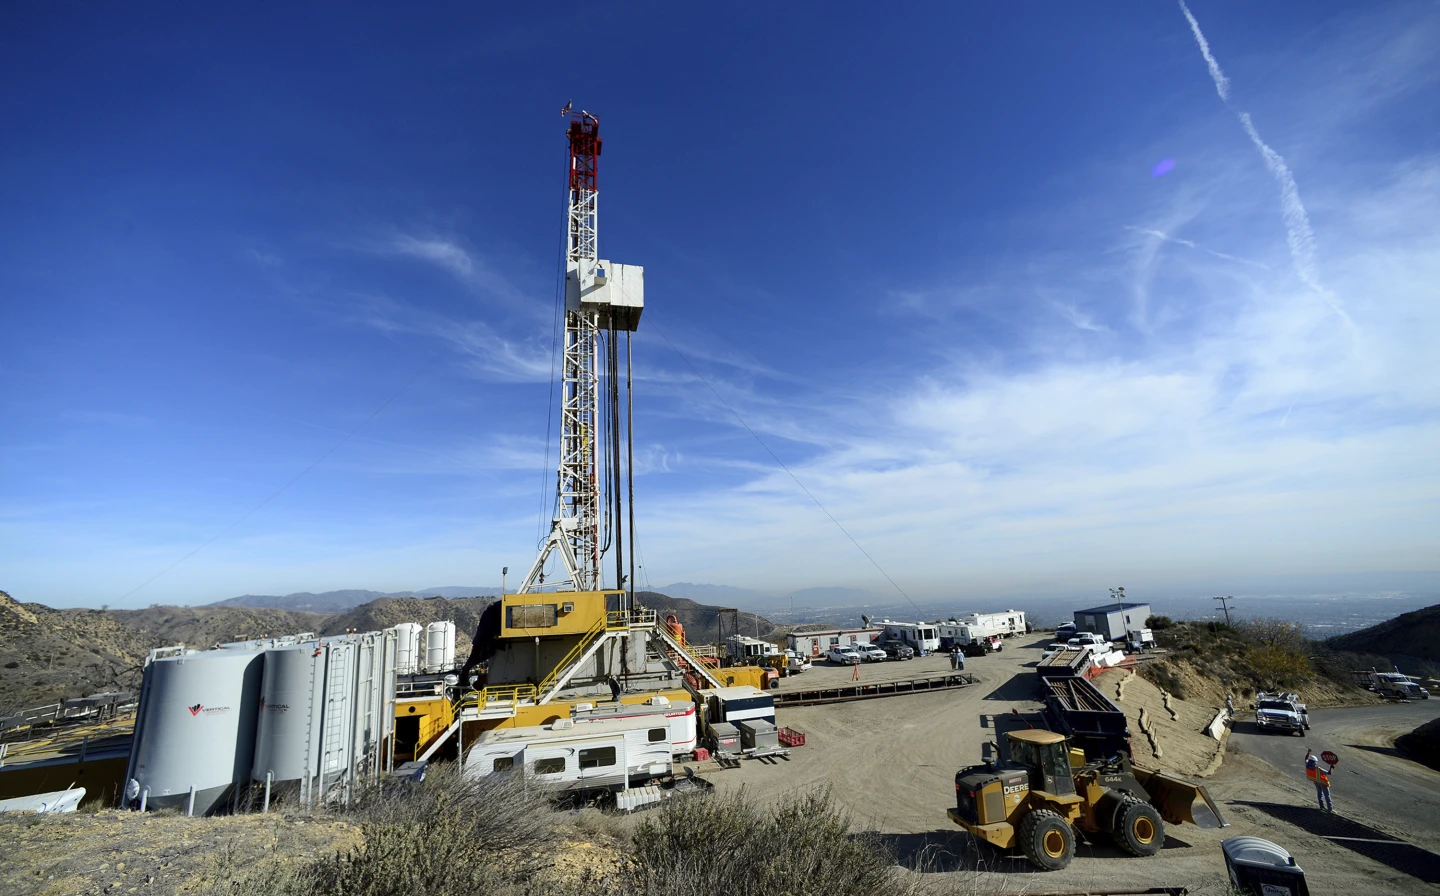 California regulators approve more gas storage capacity at the site of the worst US methane leak